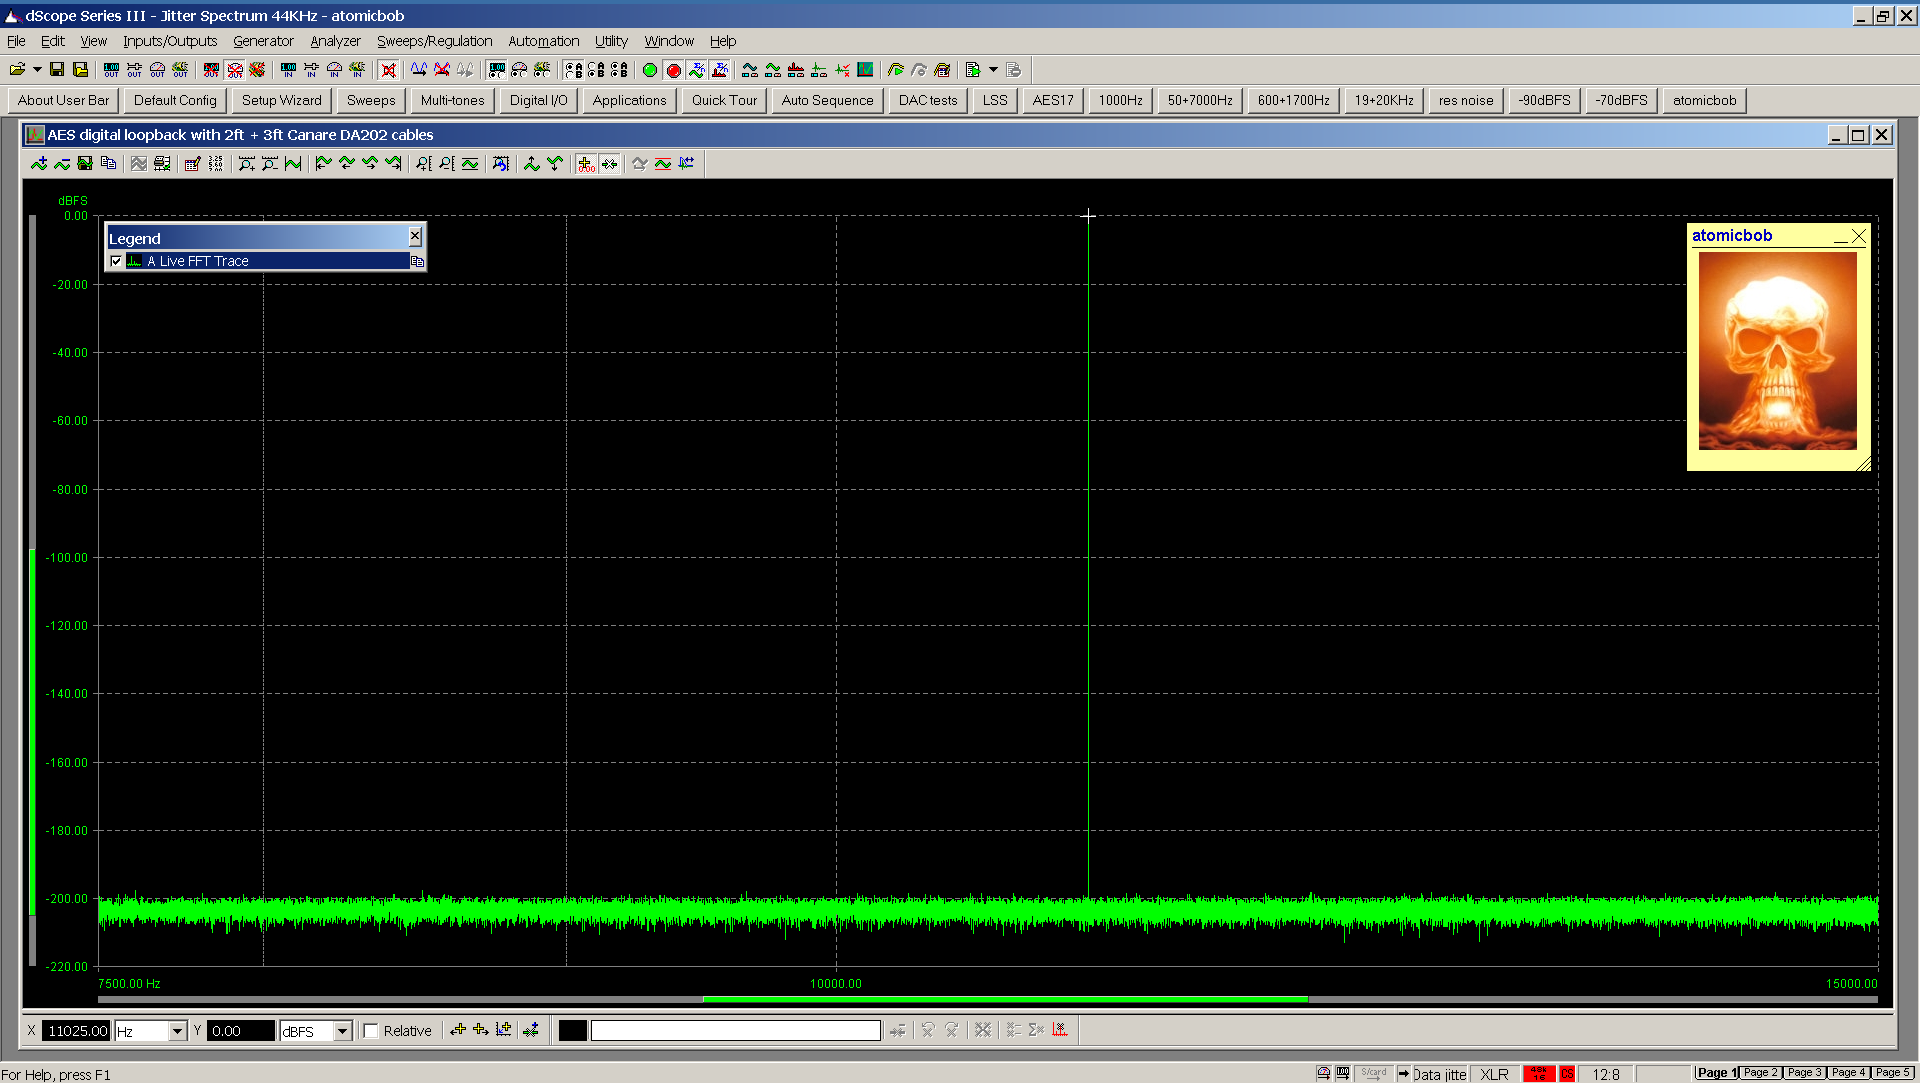 20201130 Inferred Jitter FFT - AES loopback 2ft+3ft Canare DA302 44KHz.png